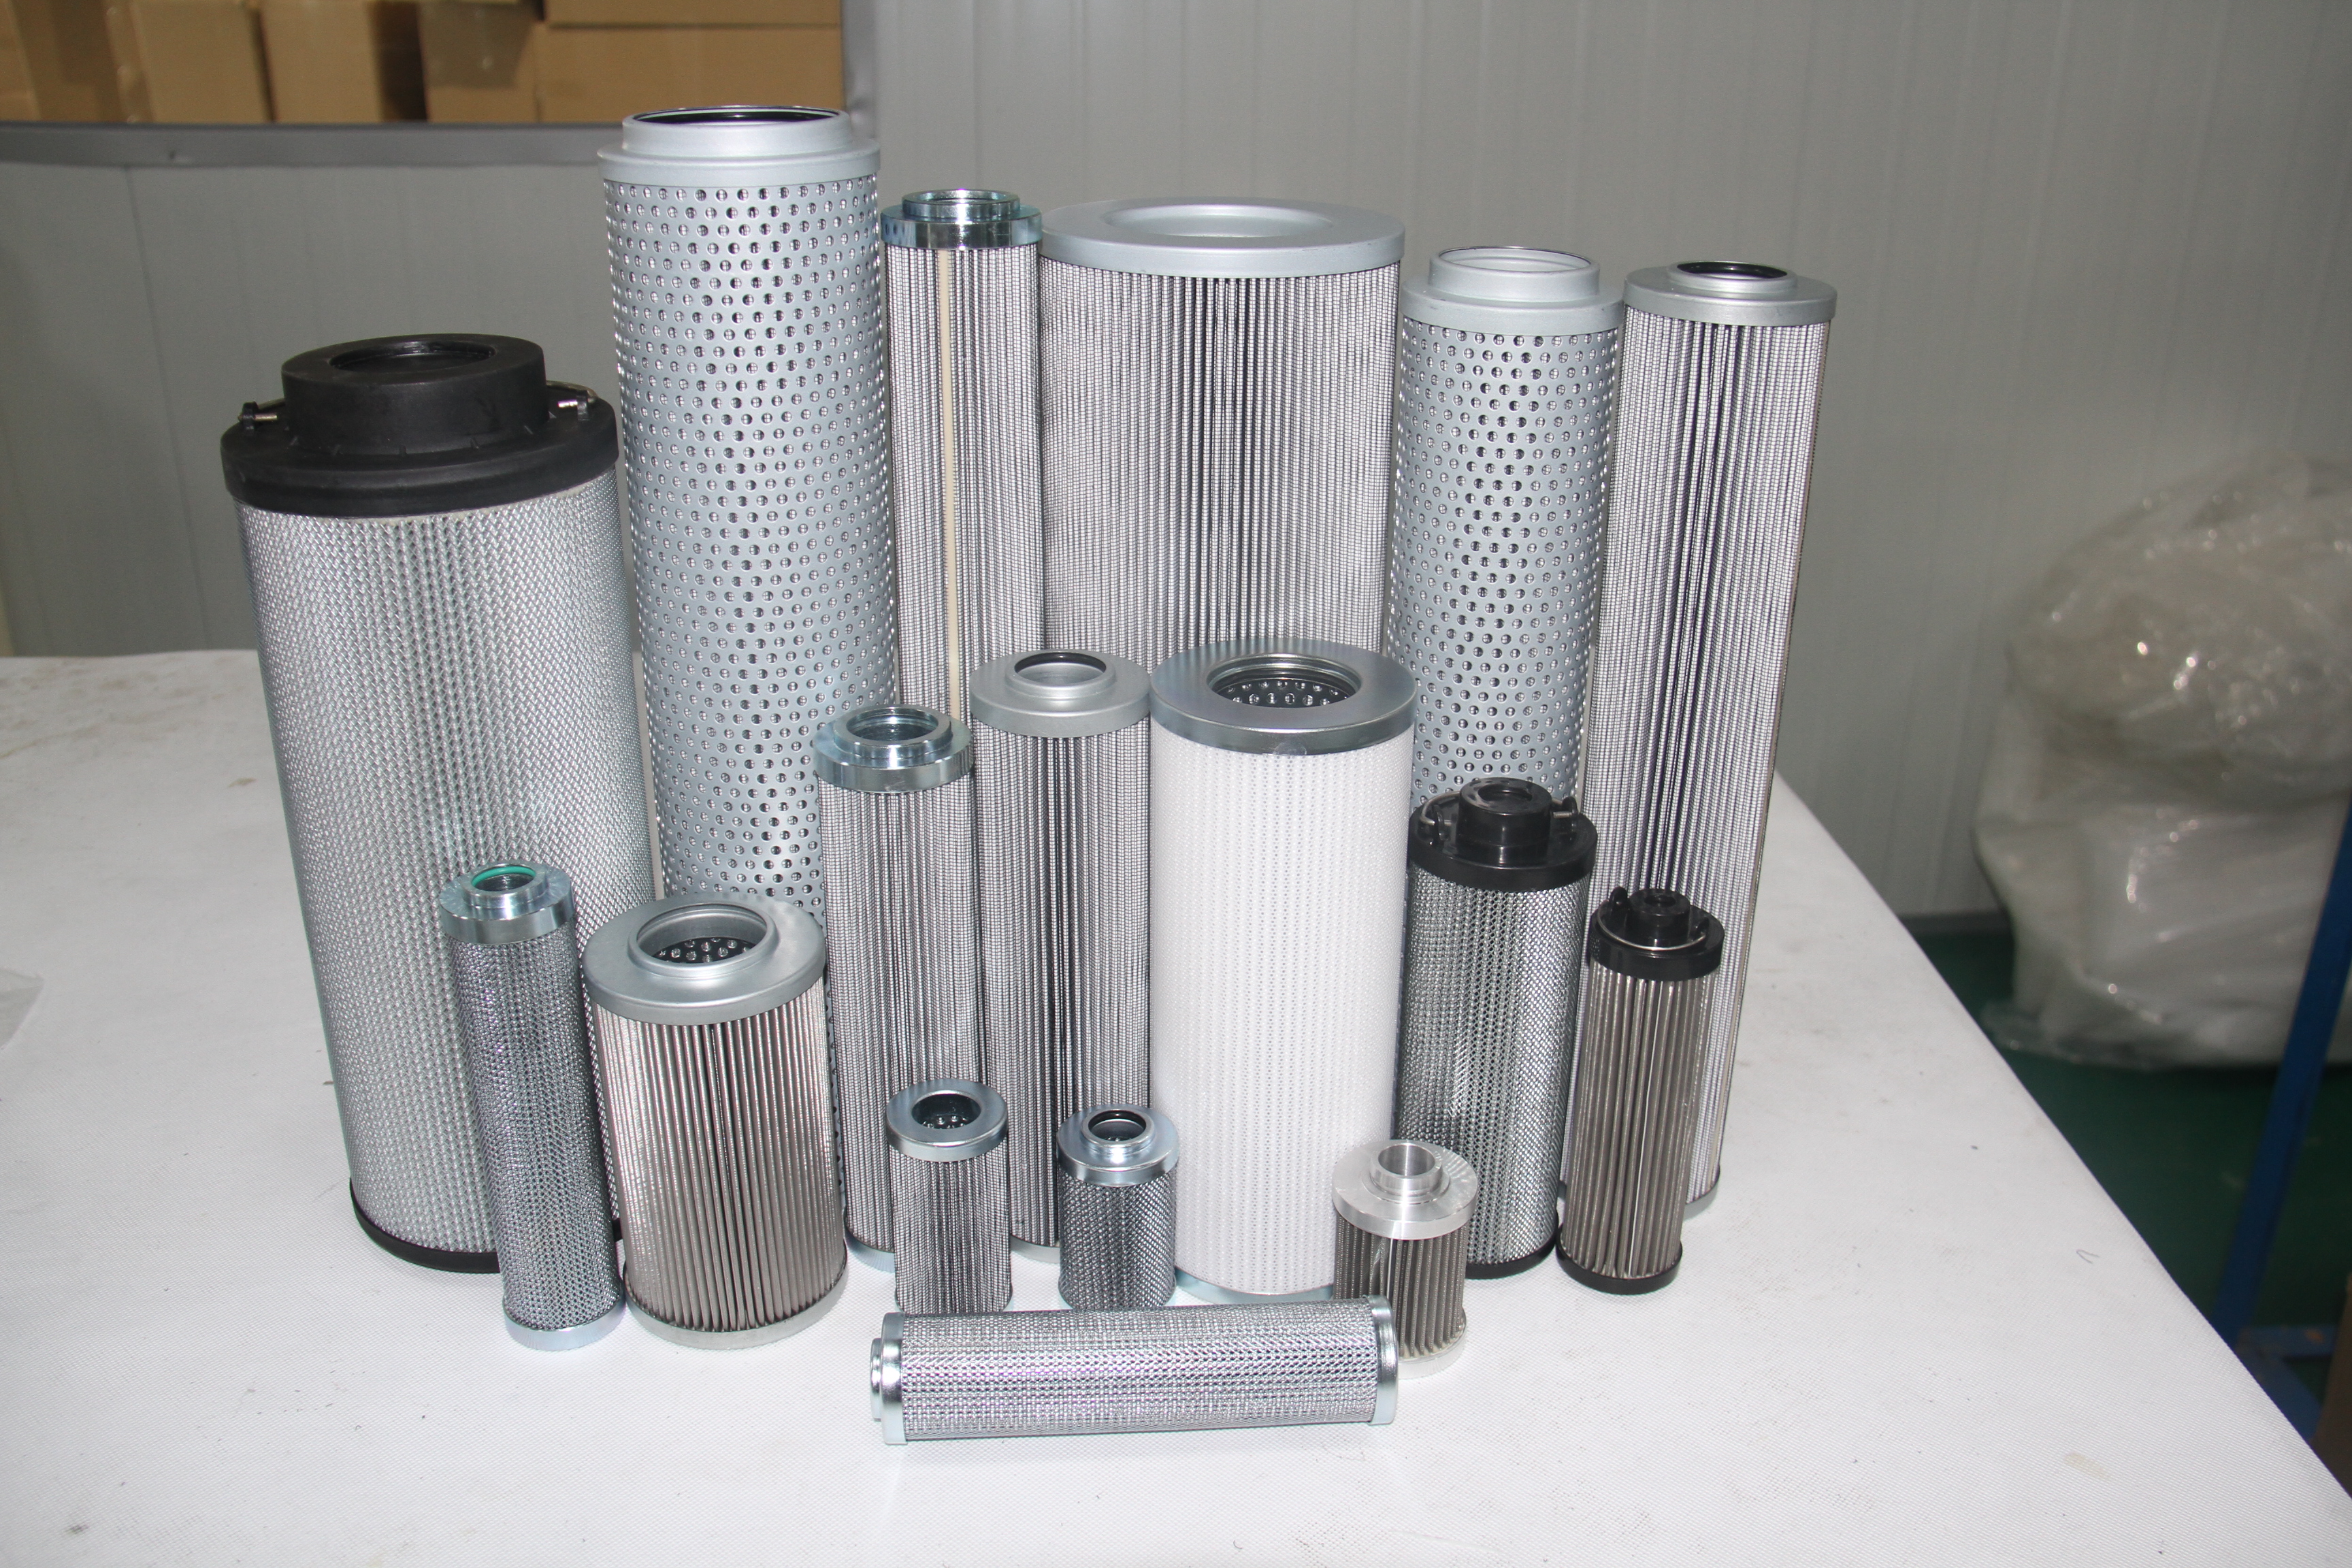 Do you know what fields hydraulic oil filters can be used in?